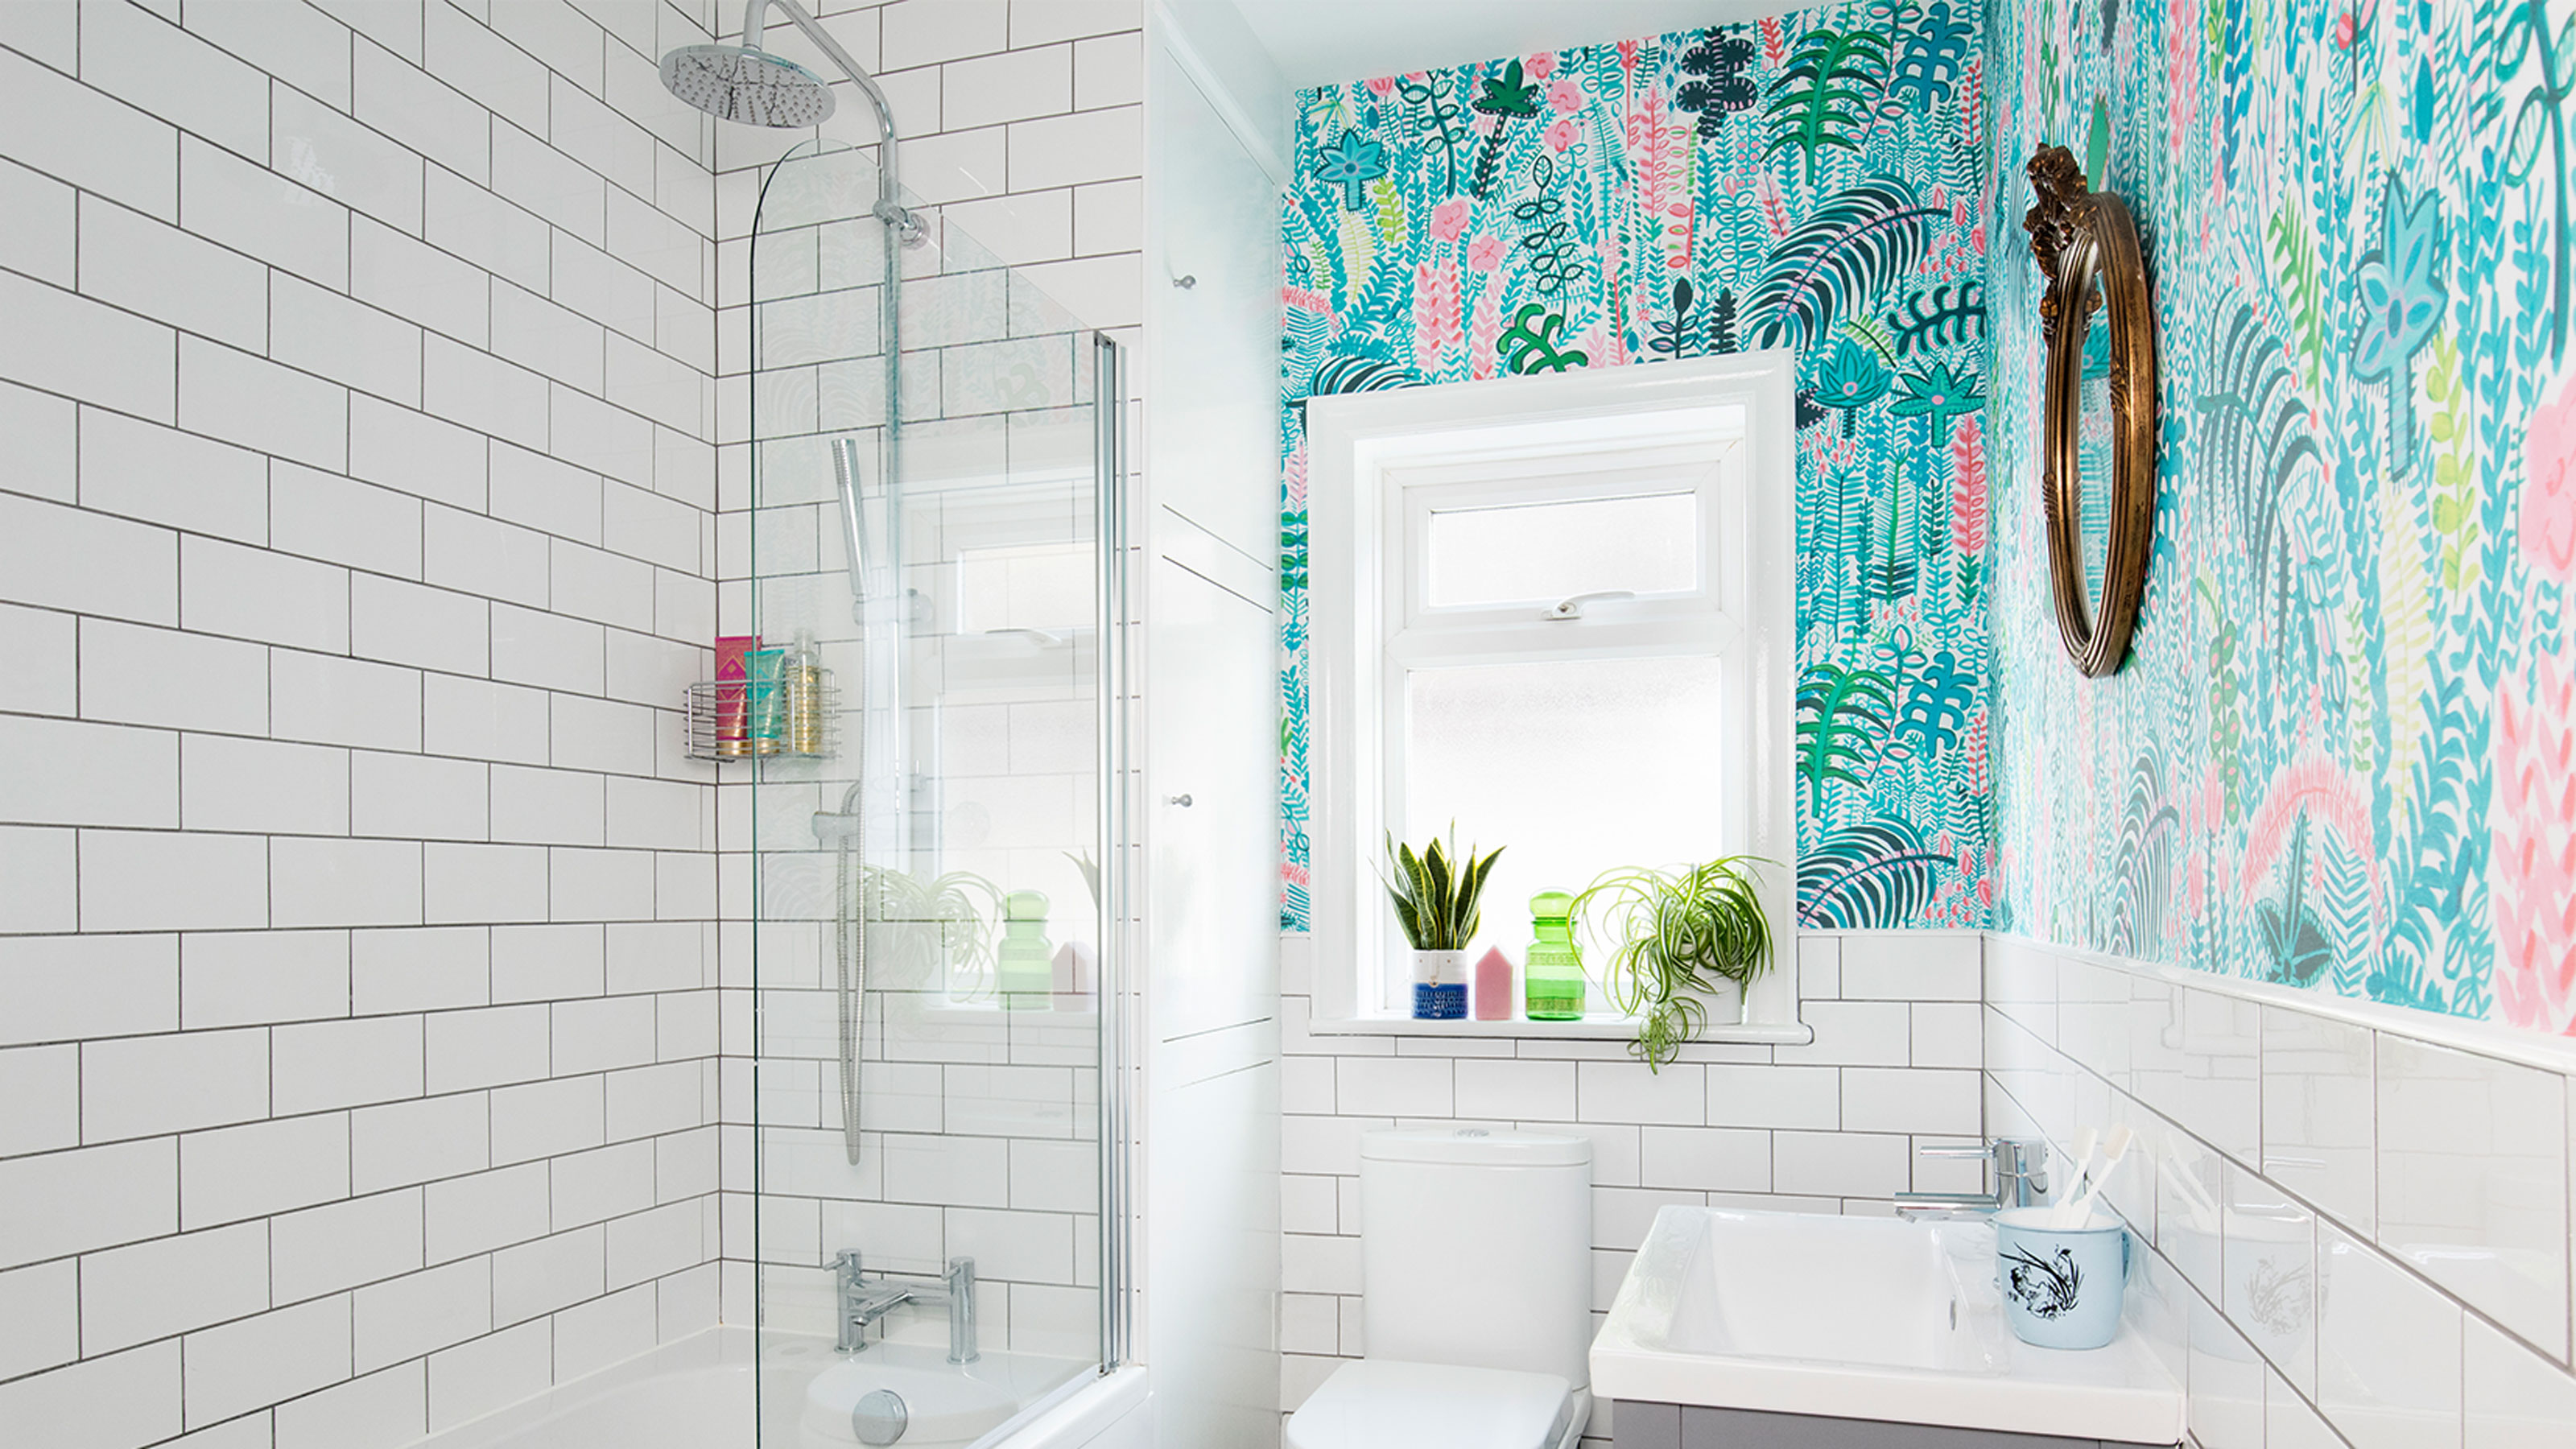 Bathroom wallpaper ideas to add colour and style to a space | Ideal Home